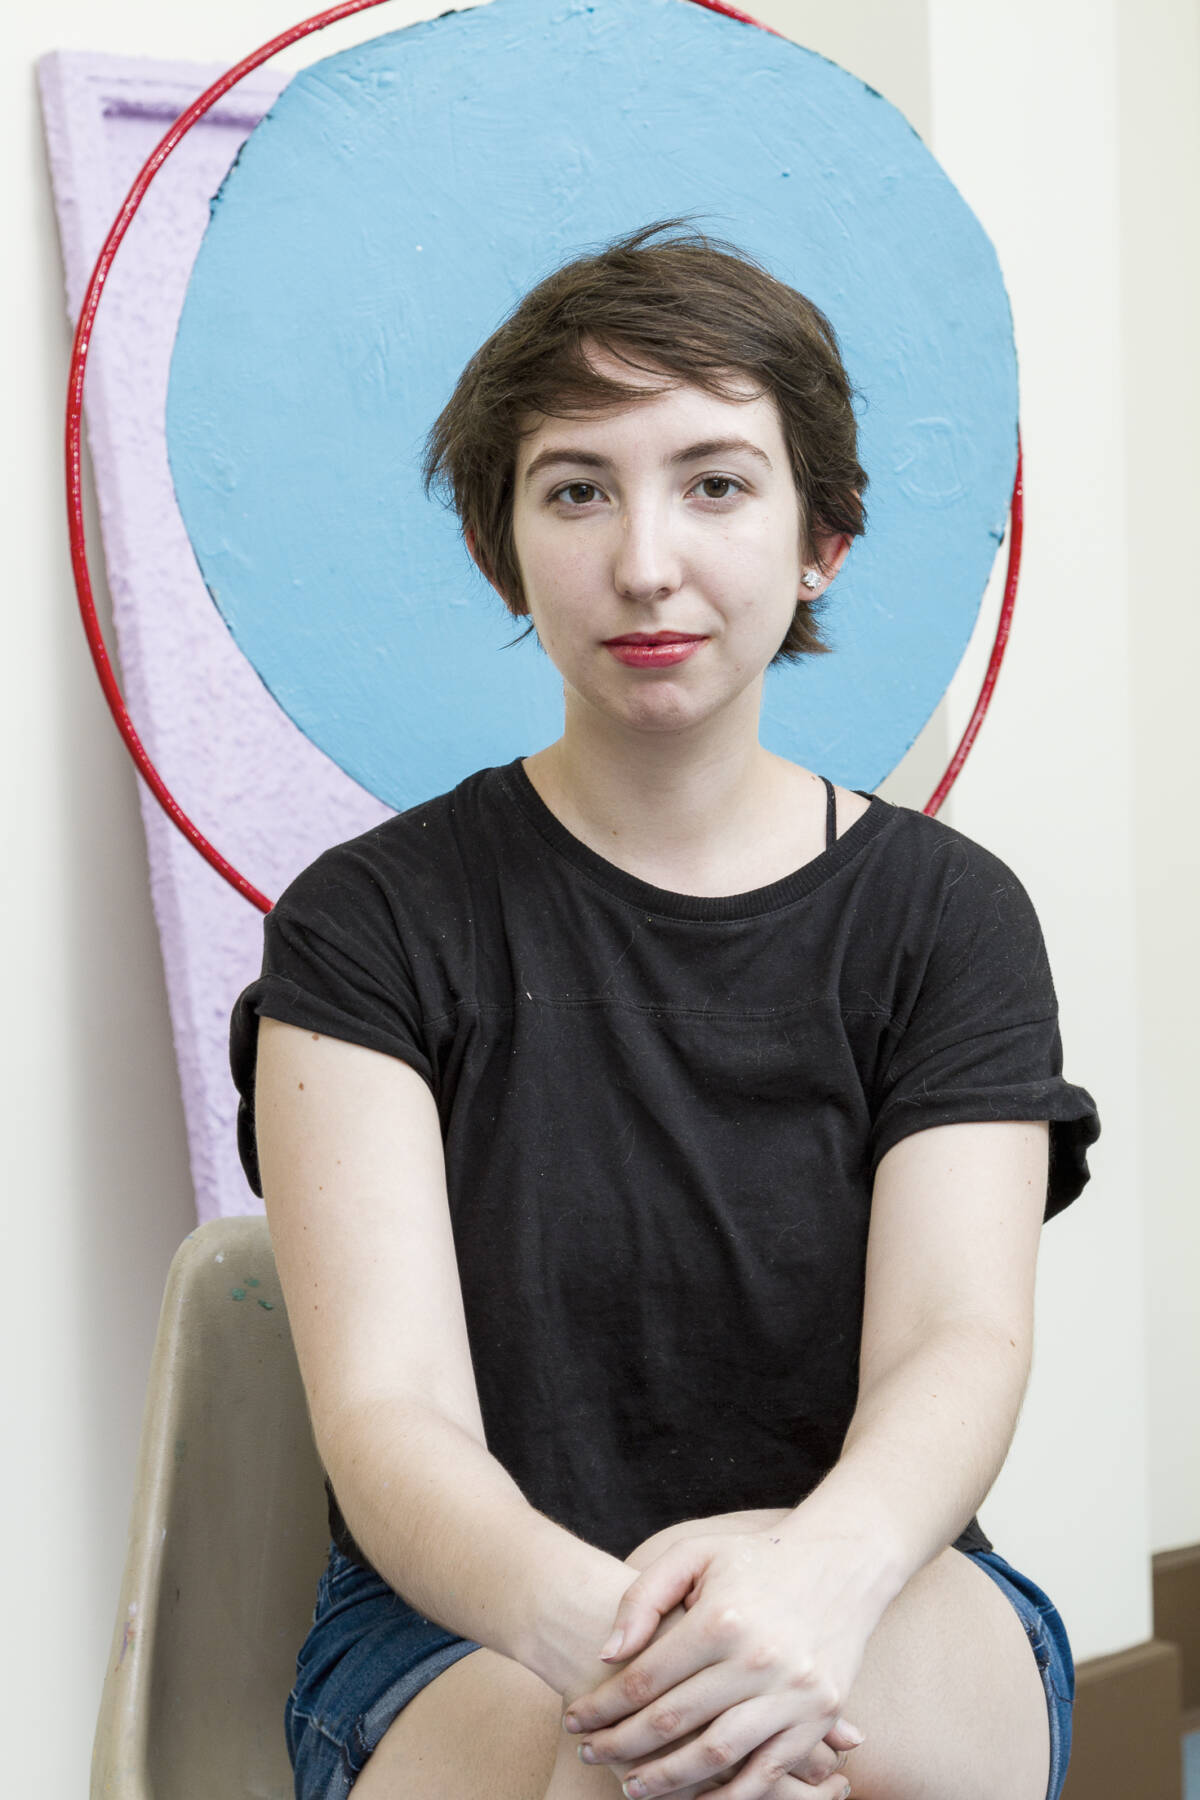 josefina-mellado wears a black t shirt with drak brown short hair and red lipstick infront of a baby blue graphic circl